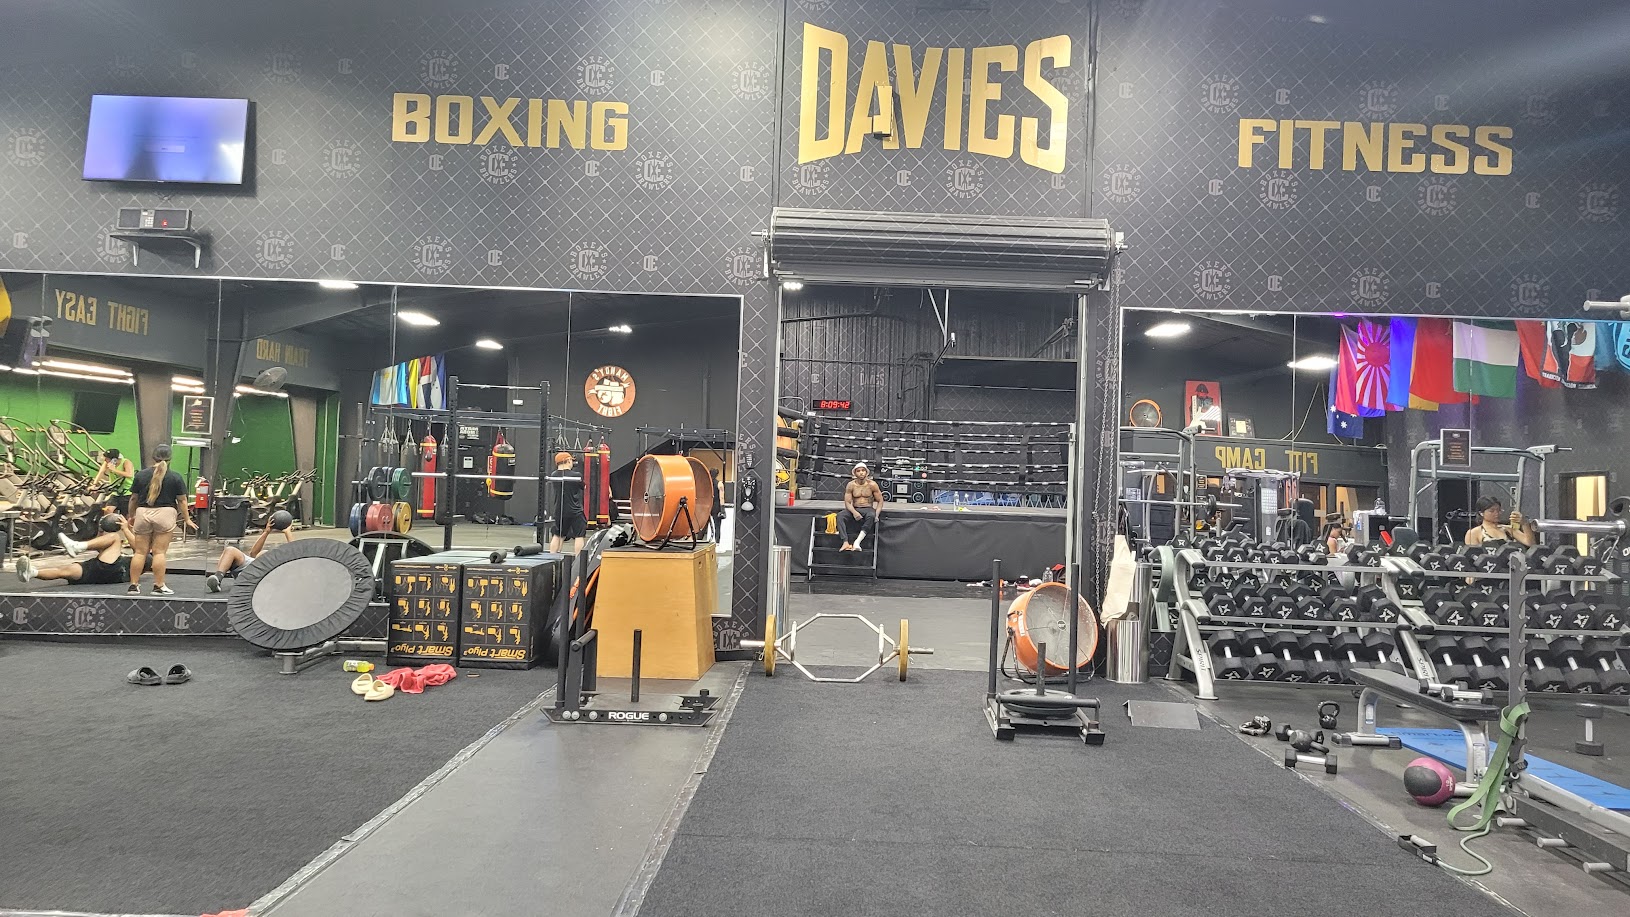 Davies Boxing and Fitness